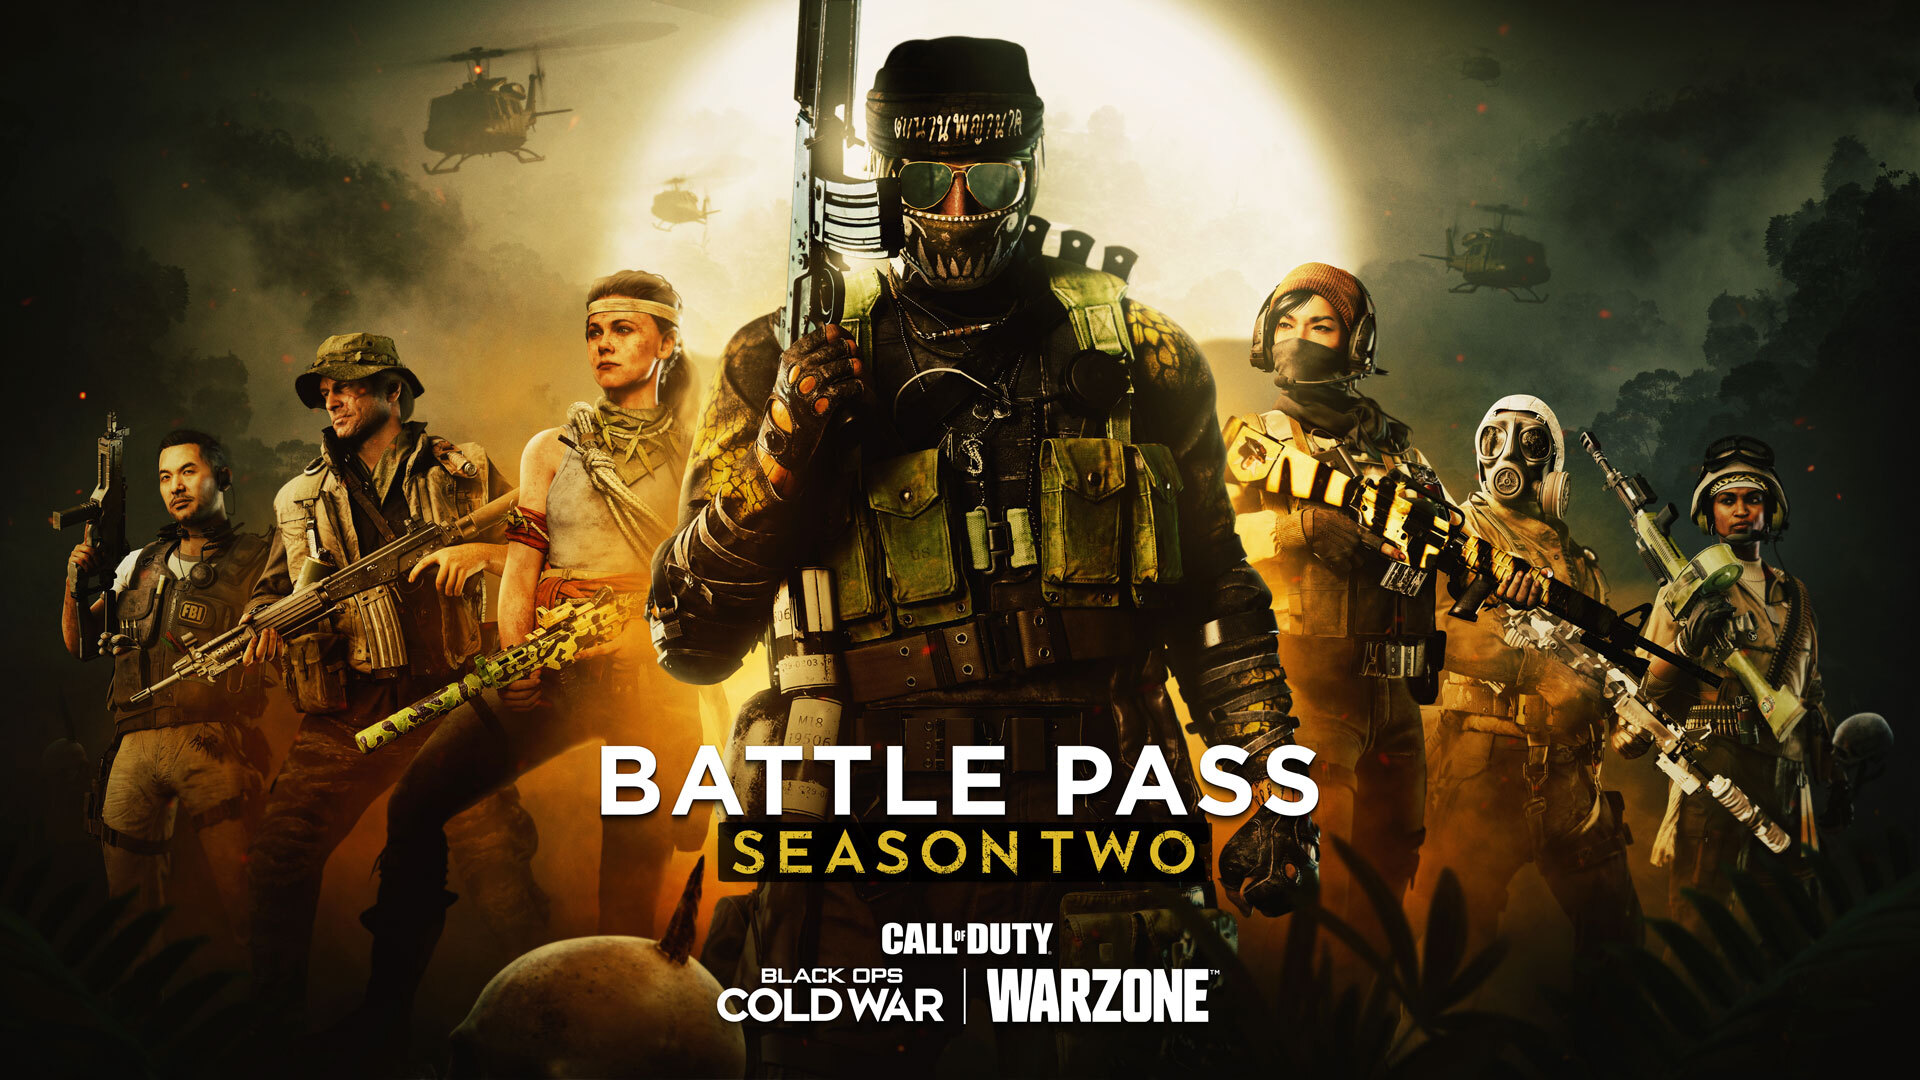 Breaking Down the Season Two Battle Pass and Initial Bundles for Call of Duty®: Black Ops Cold War and Warzone™